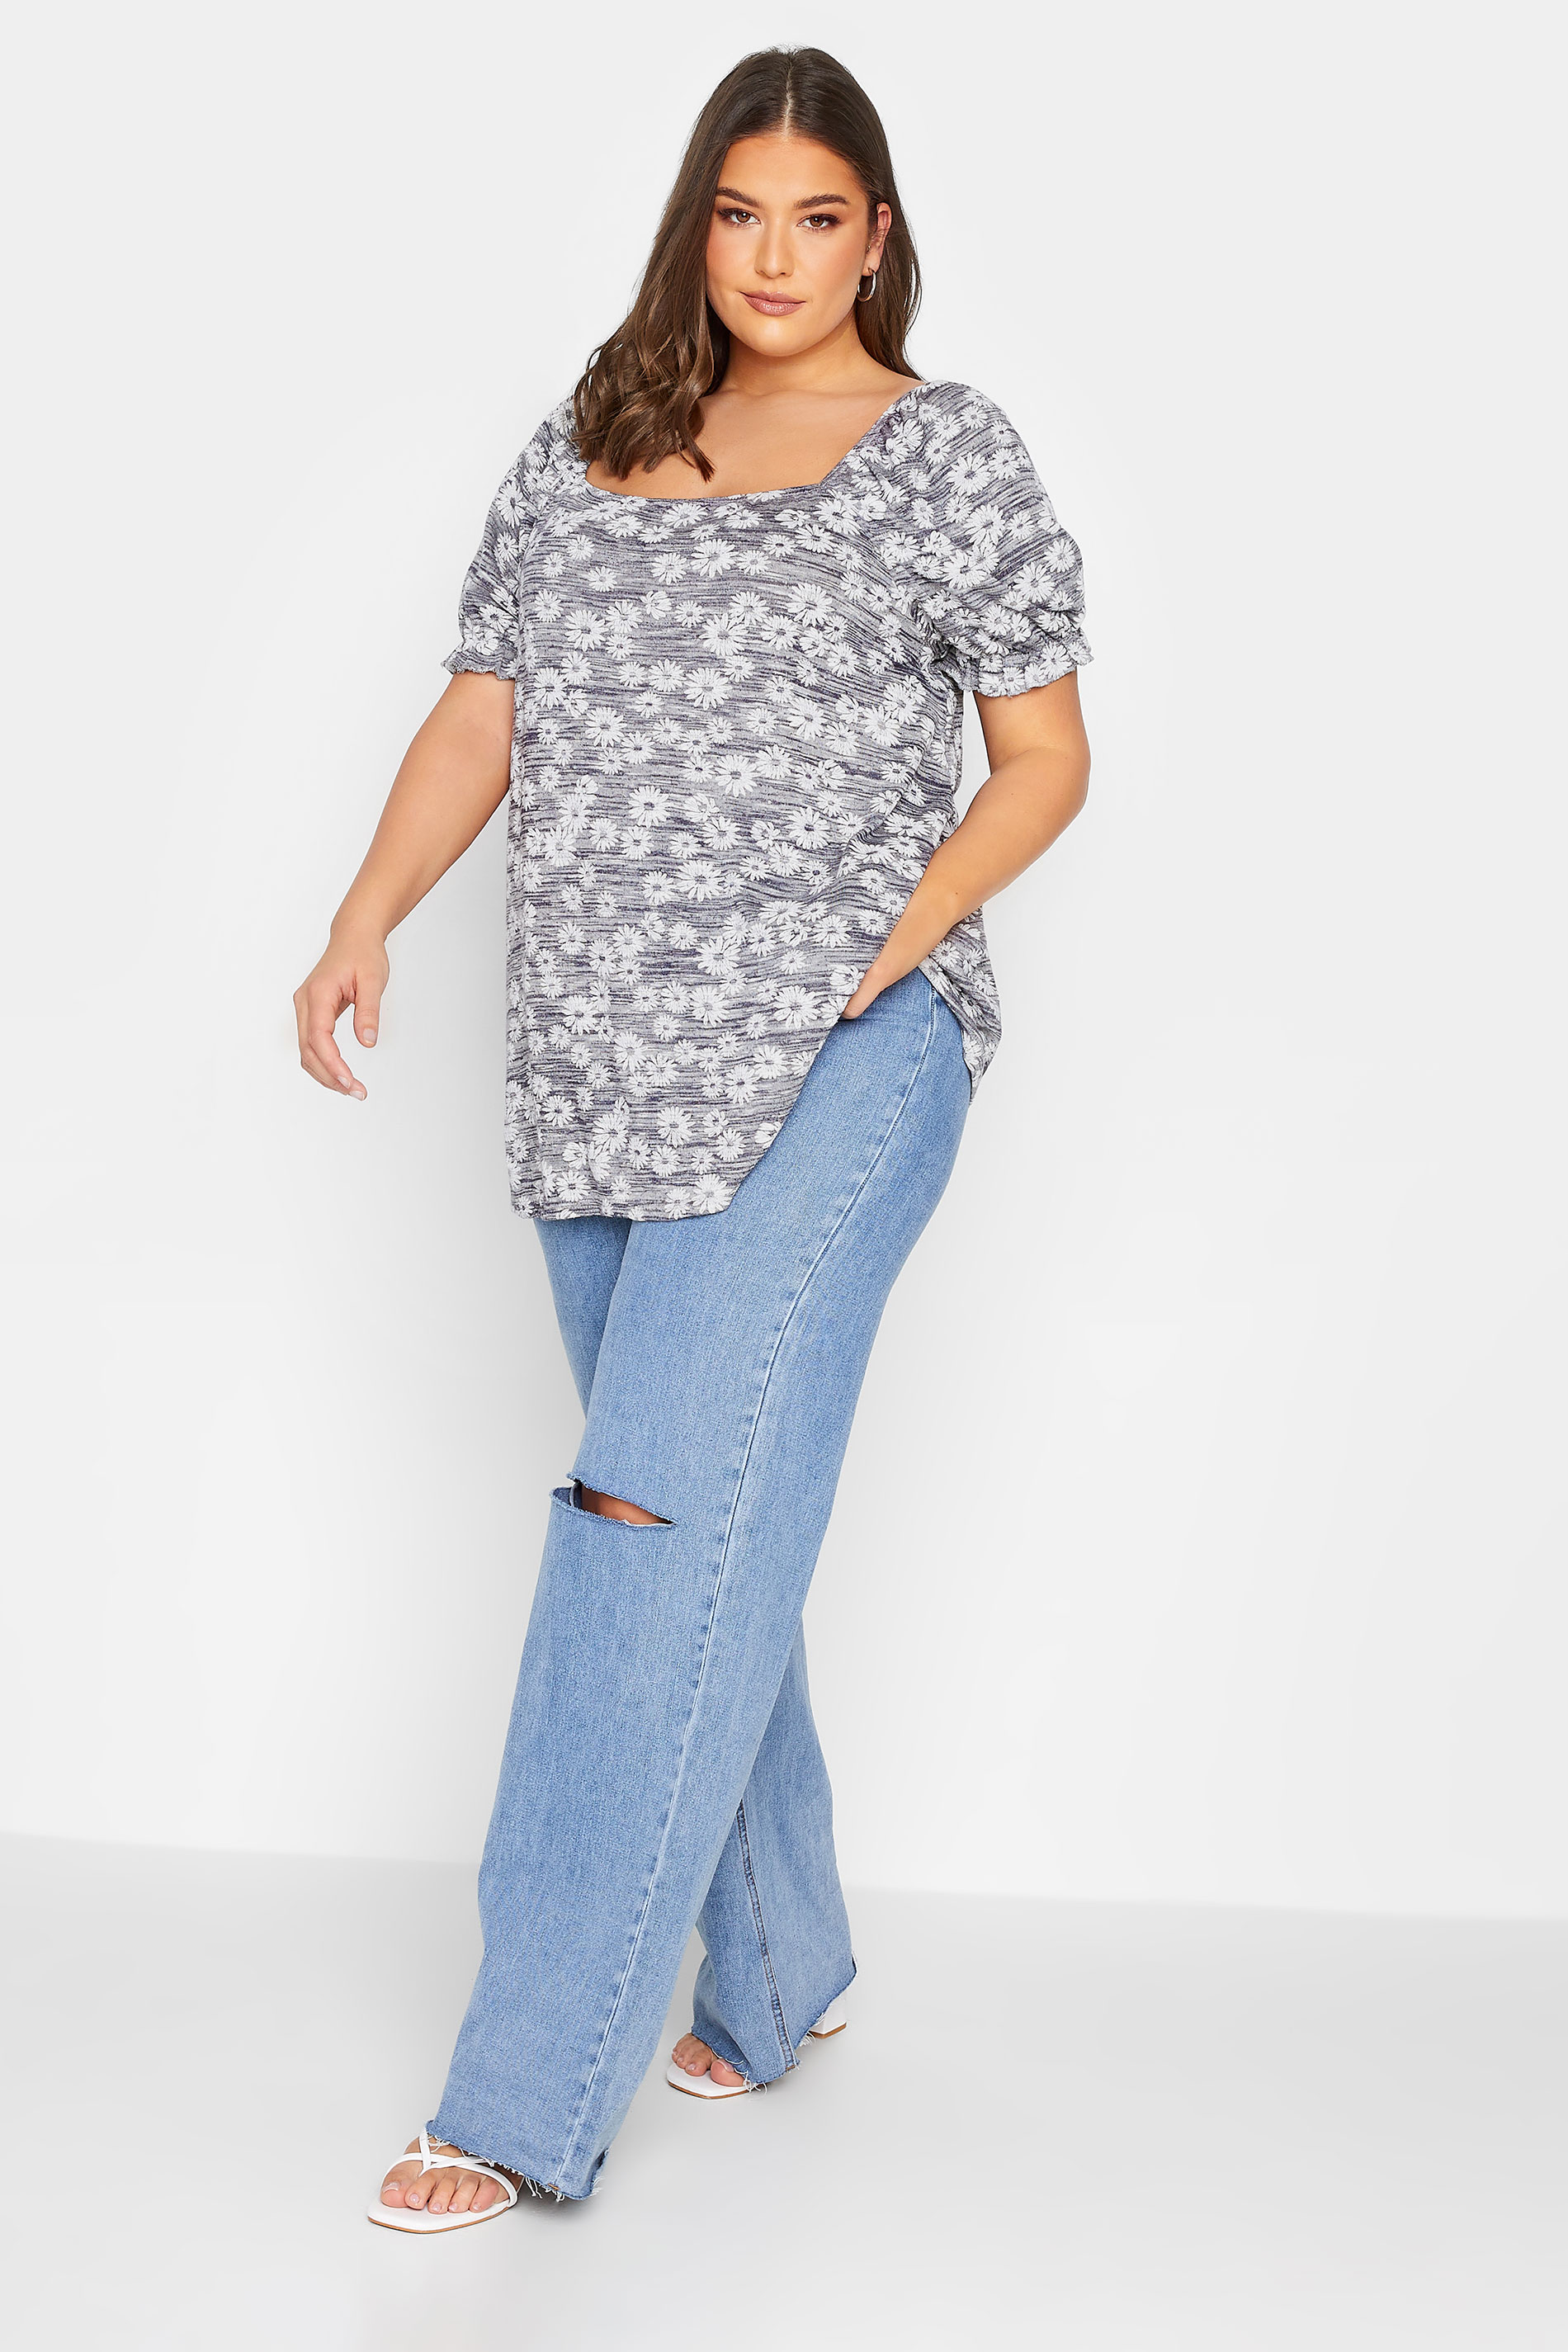 YOURS Plus Size Grey Marl Ditsy Floral Top | Yours Clothing 2